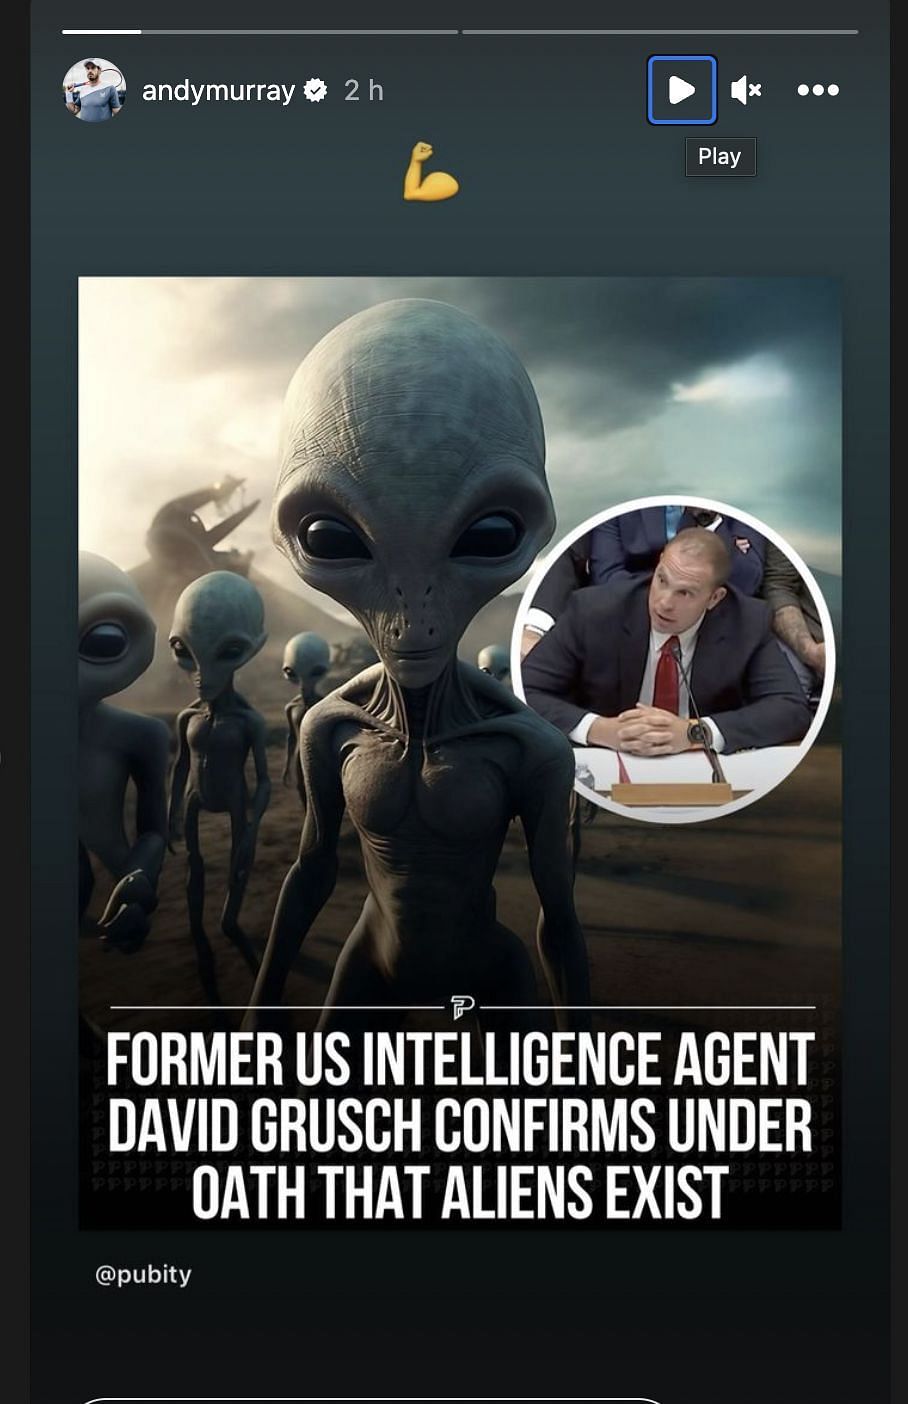 Murray reacts to the confirmation of aliens&#039; existence under oath